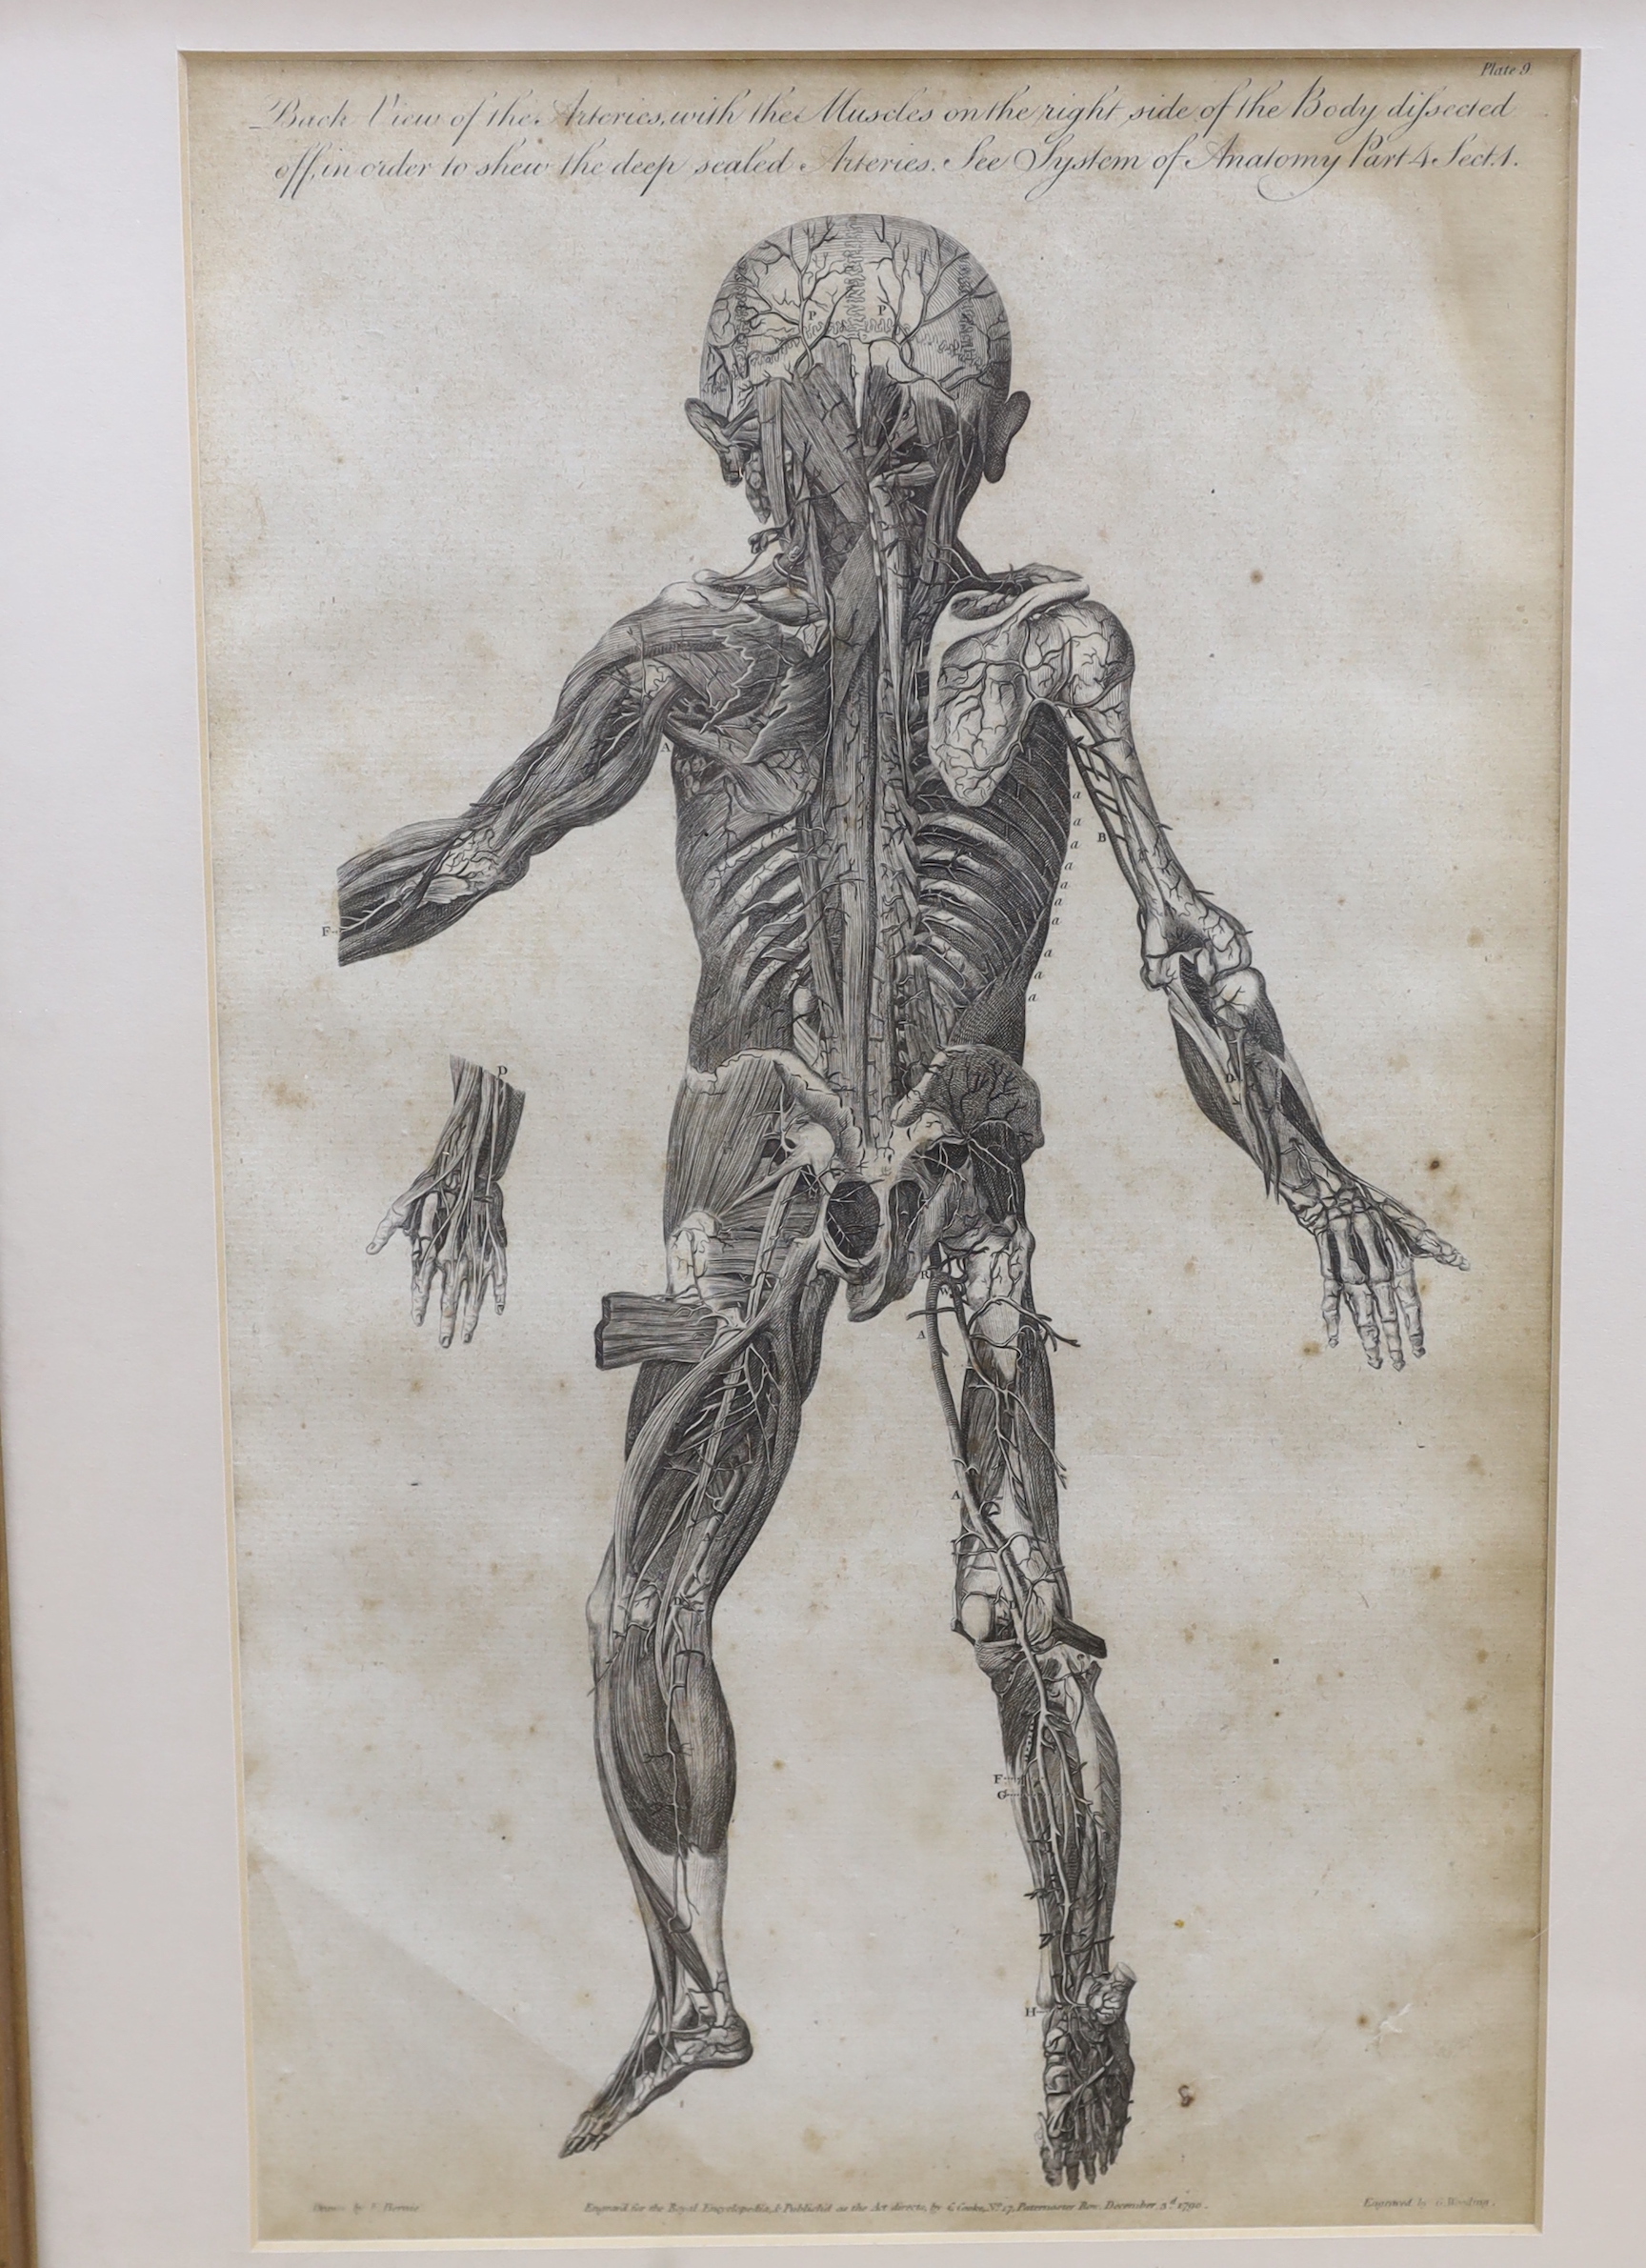 Six medical and anatomical 18th century engravings, including arteries with the muscles on the right side of the body and organs of sense, see, system of the anatomy, publ. by C. Cooke, various dates, each 36 x 21cm